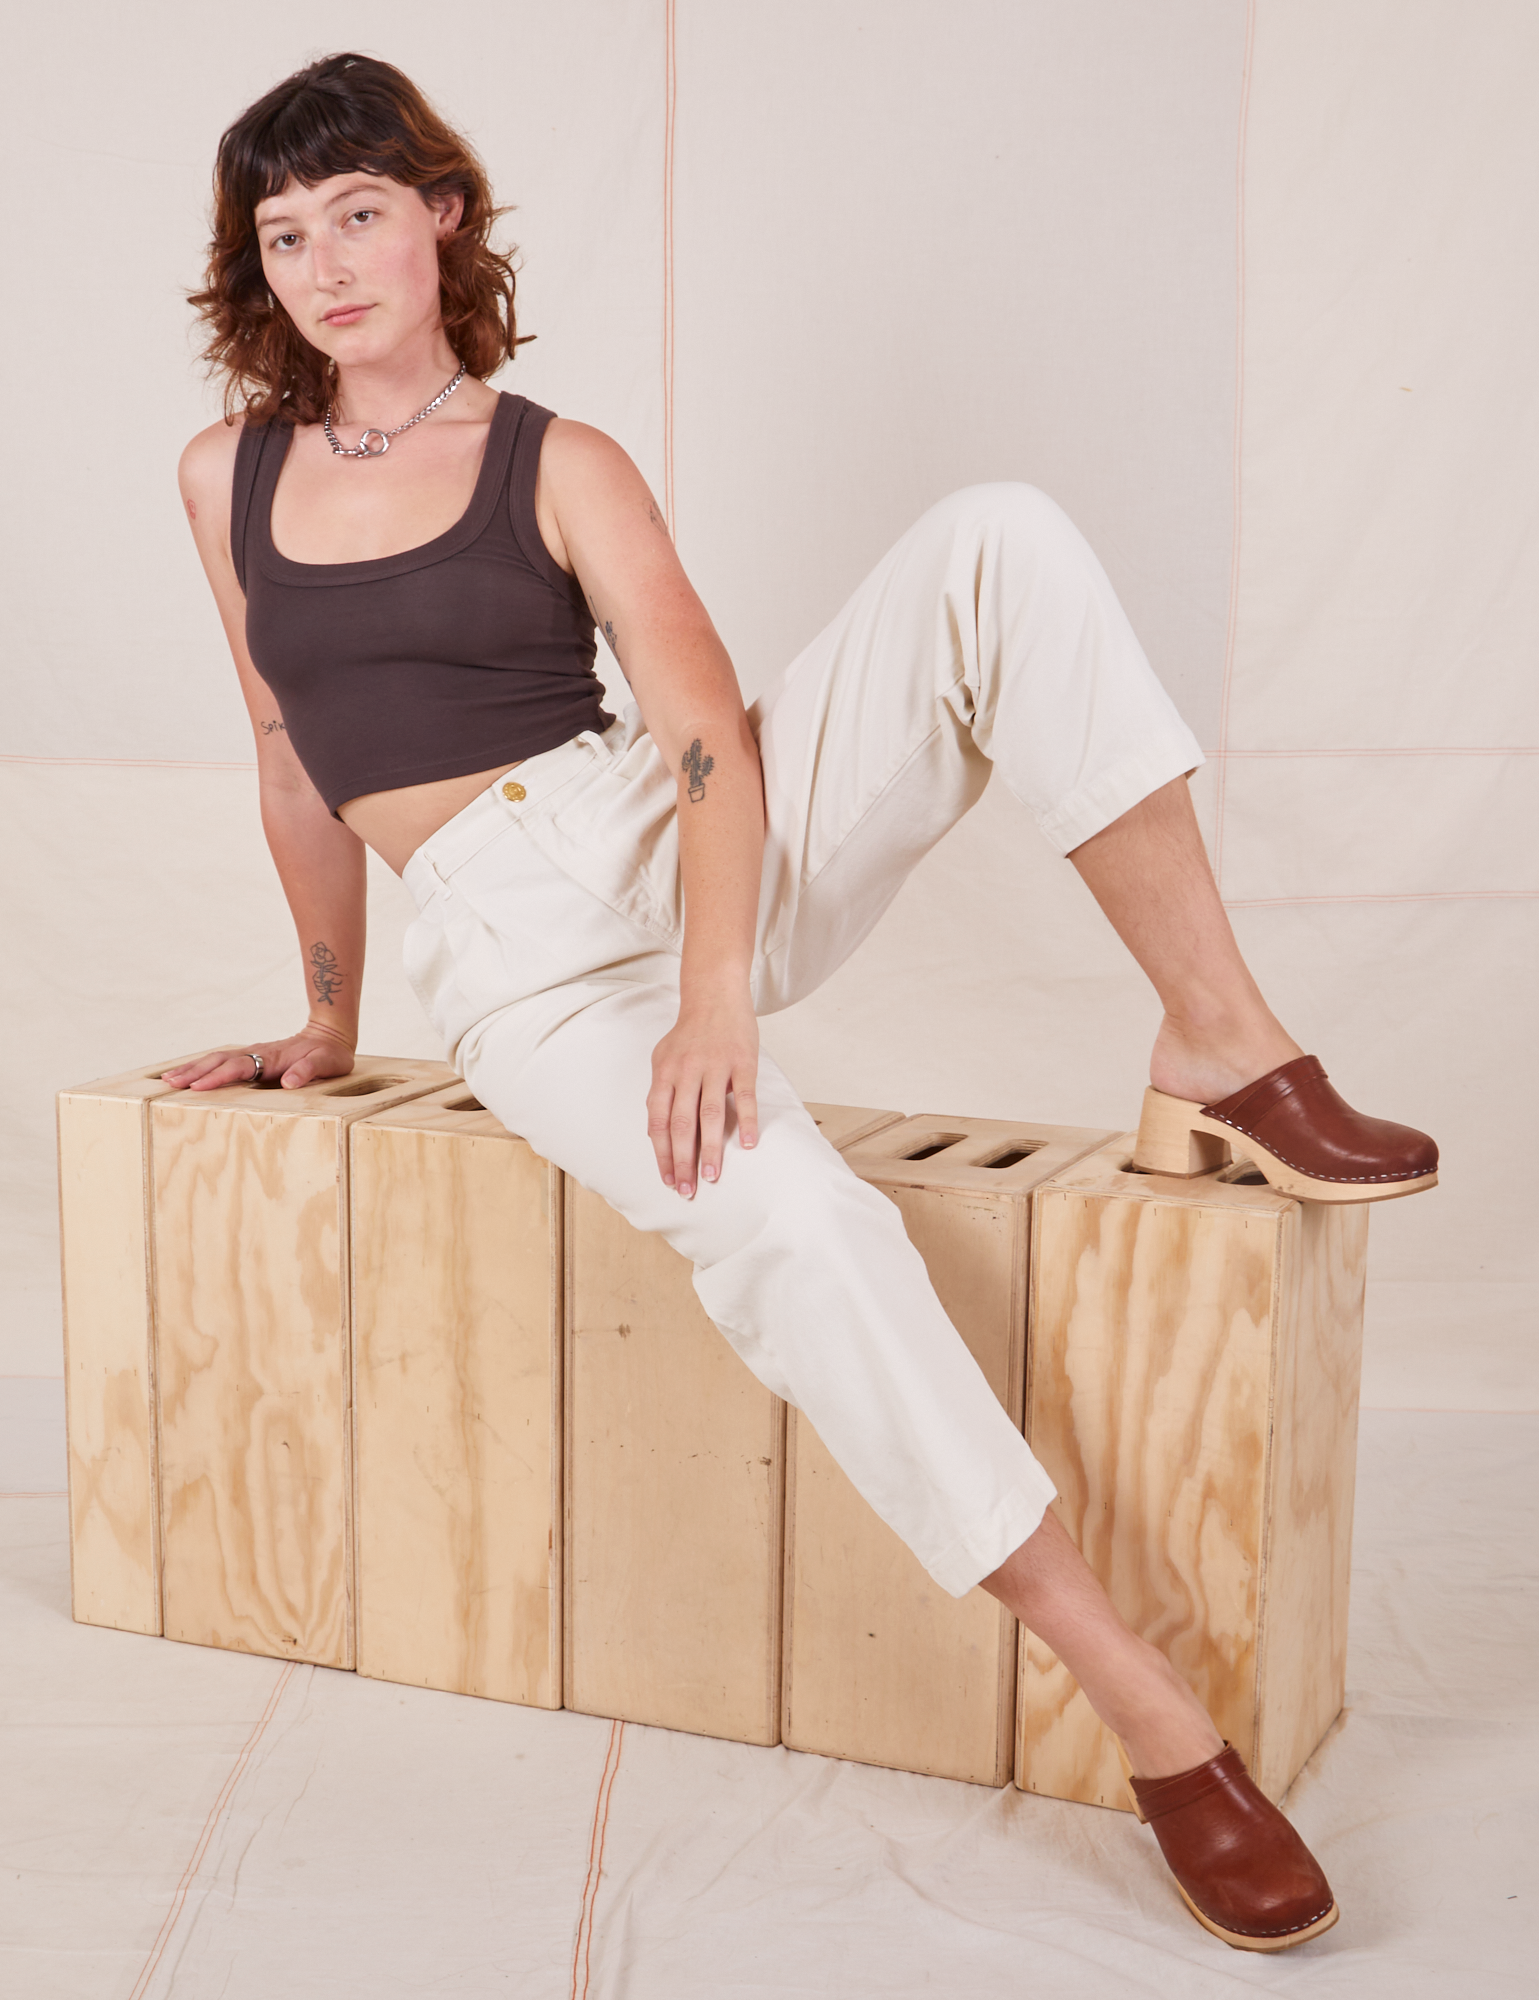 Alex is 5'8" and wearing XXS Heavyweight Trousers in Vintage Tee Off-White paired with espresso brown Cropped Tank Top.